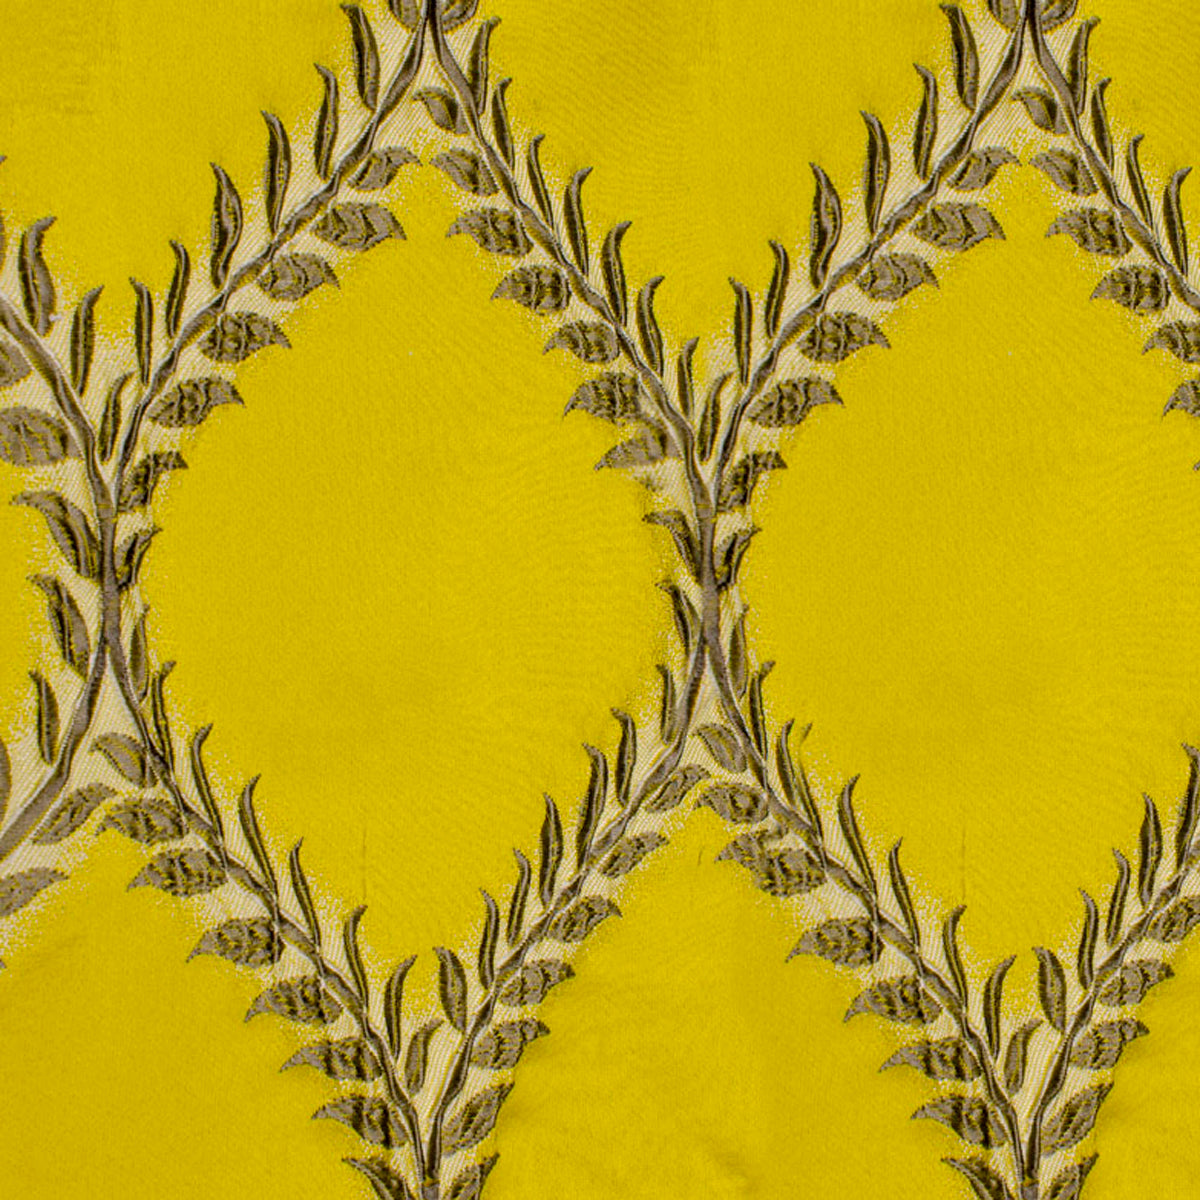  Lunarable Mustard Fabric by The Yard, Modern Ikat Motif with  Effects and Wavy Symmetric Lines Abstract, Decorative Satin Fabric for Home  Textiles and Crafts, 2 Yards, White Marigold : Arts, Crafts